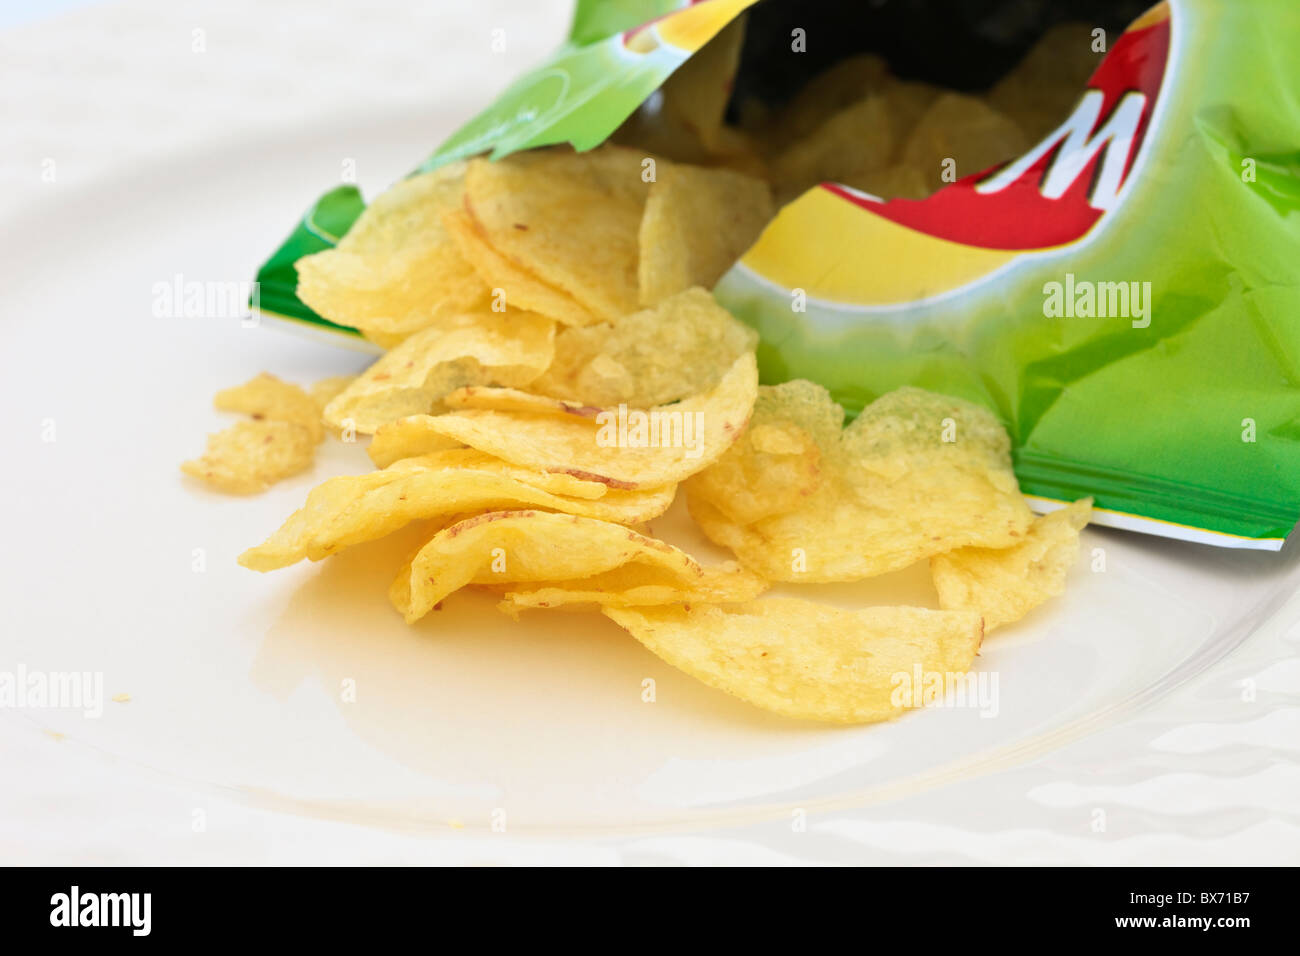 Walkers crisp packet open with potato crisps spilling out on a plate. England UK Stock Photo